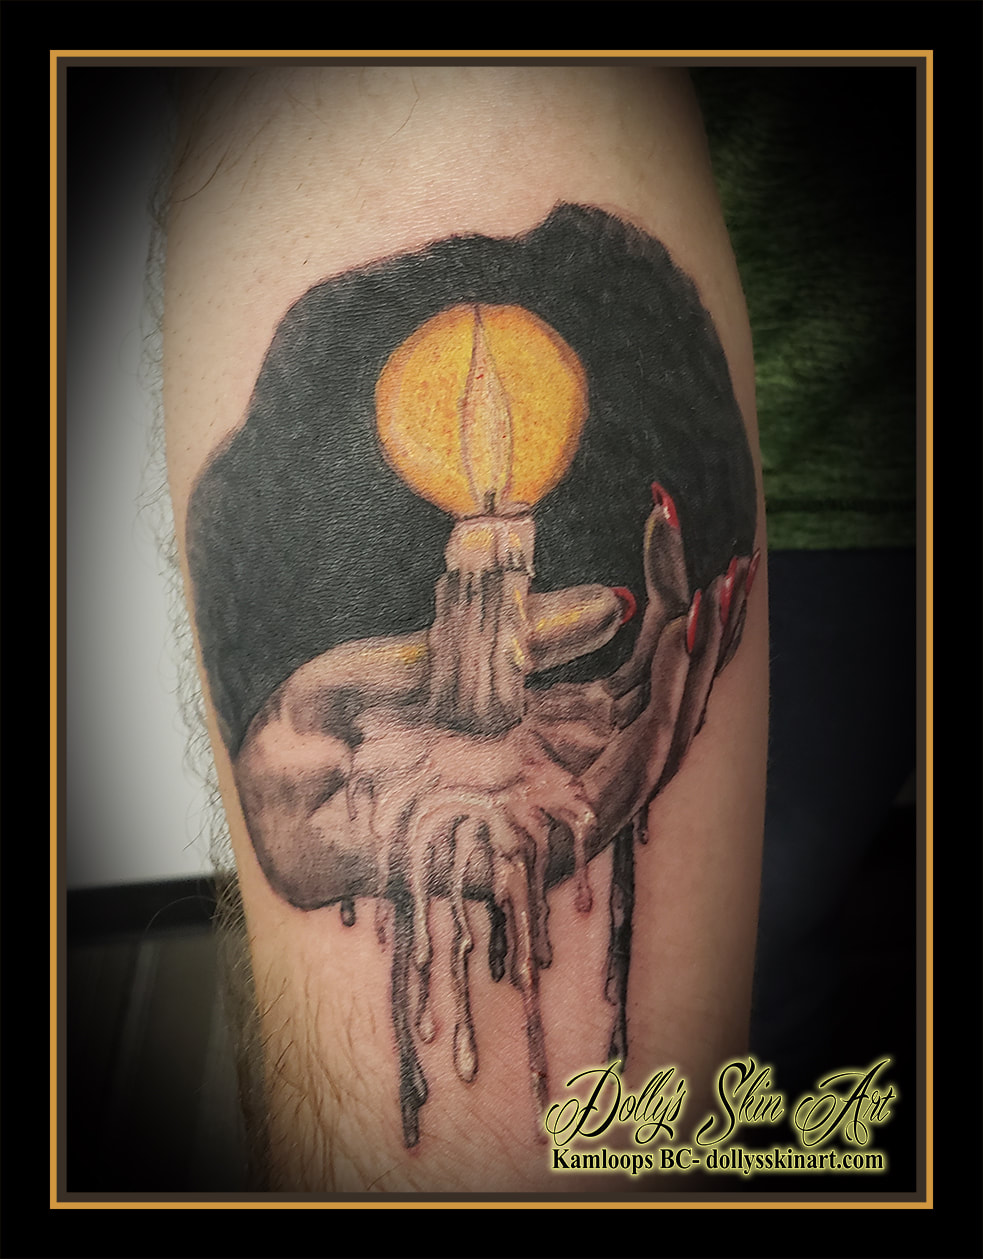 candle tattoo woman's hand holding candle fire wax nails black yellow orange red white shading tattoo kamloops dolly's skin art